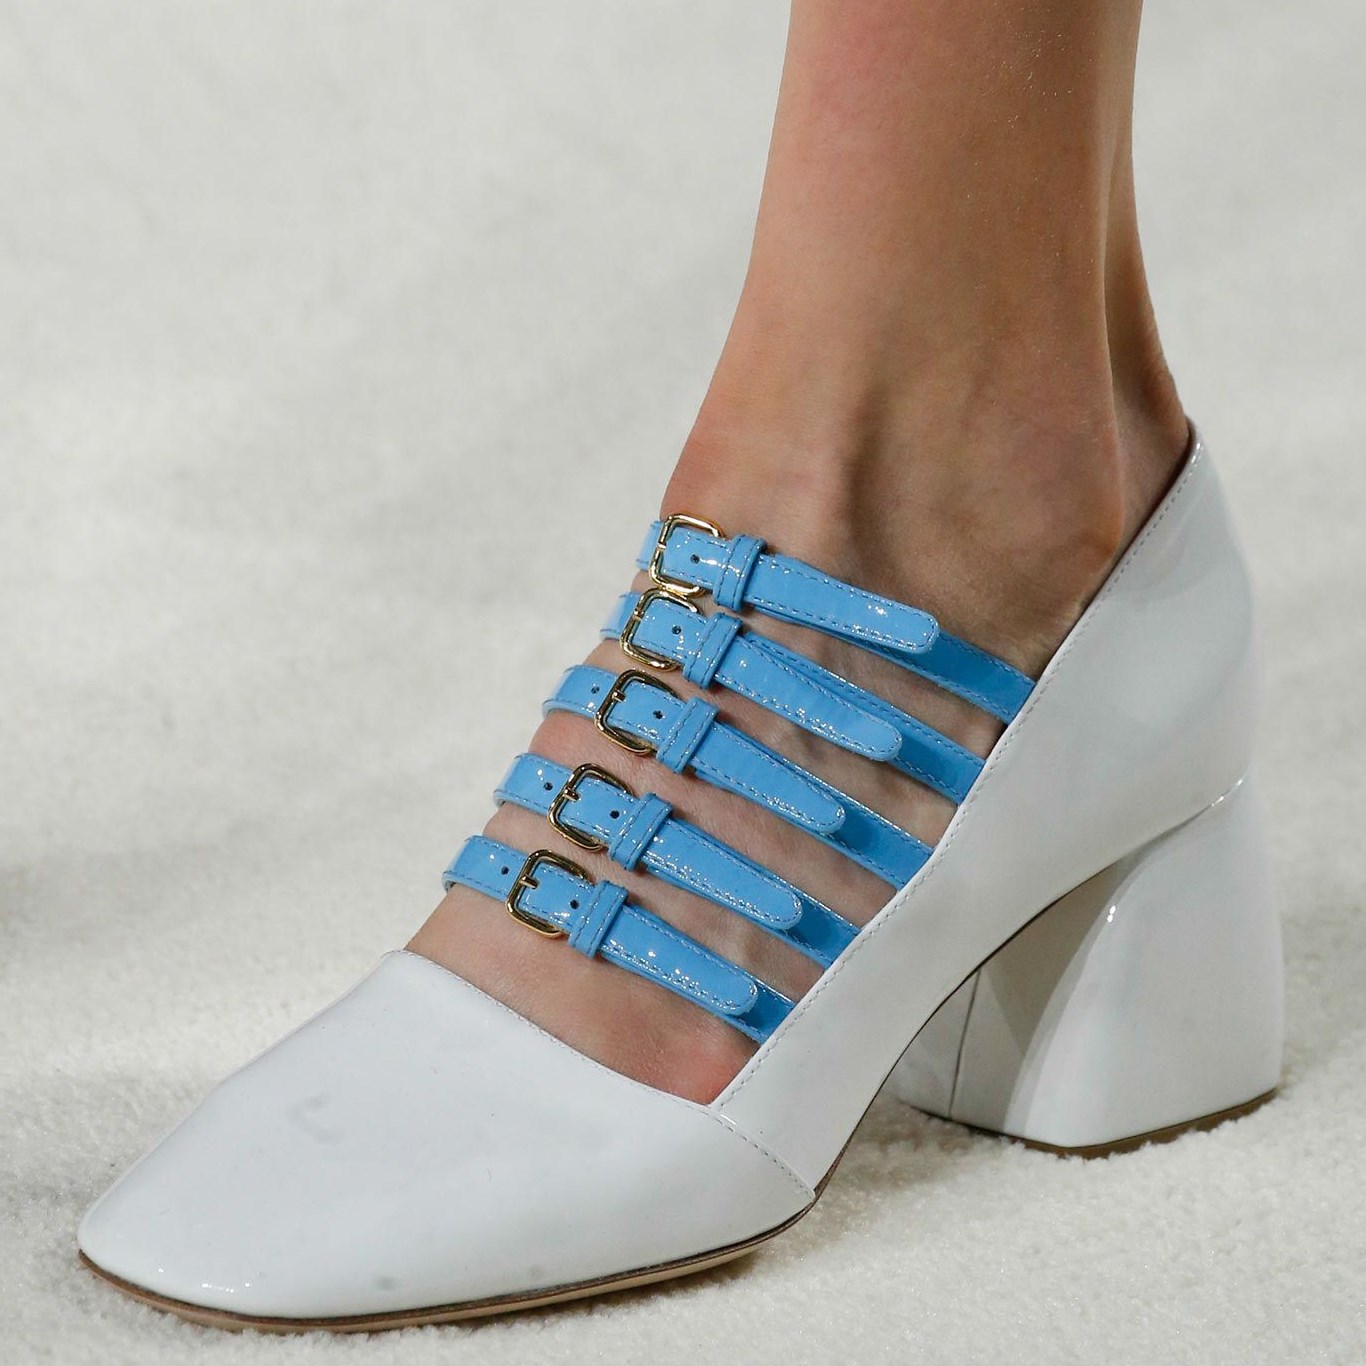 White and Blue Buckles Mary Jane Pumps Block Heels Vintage Shoes|FSJshoes